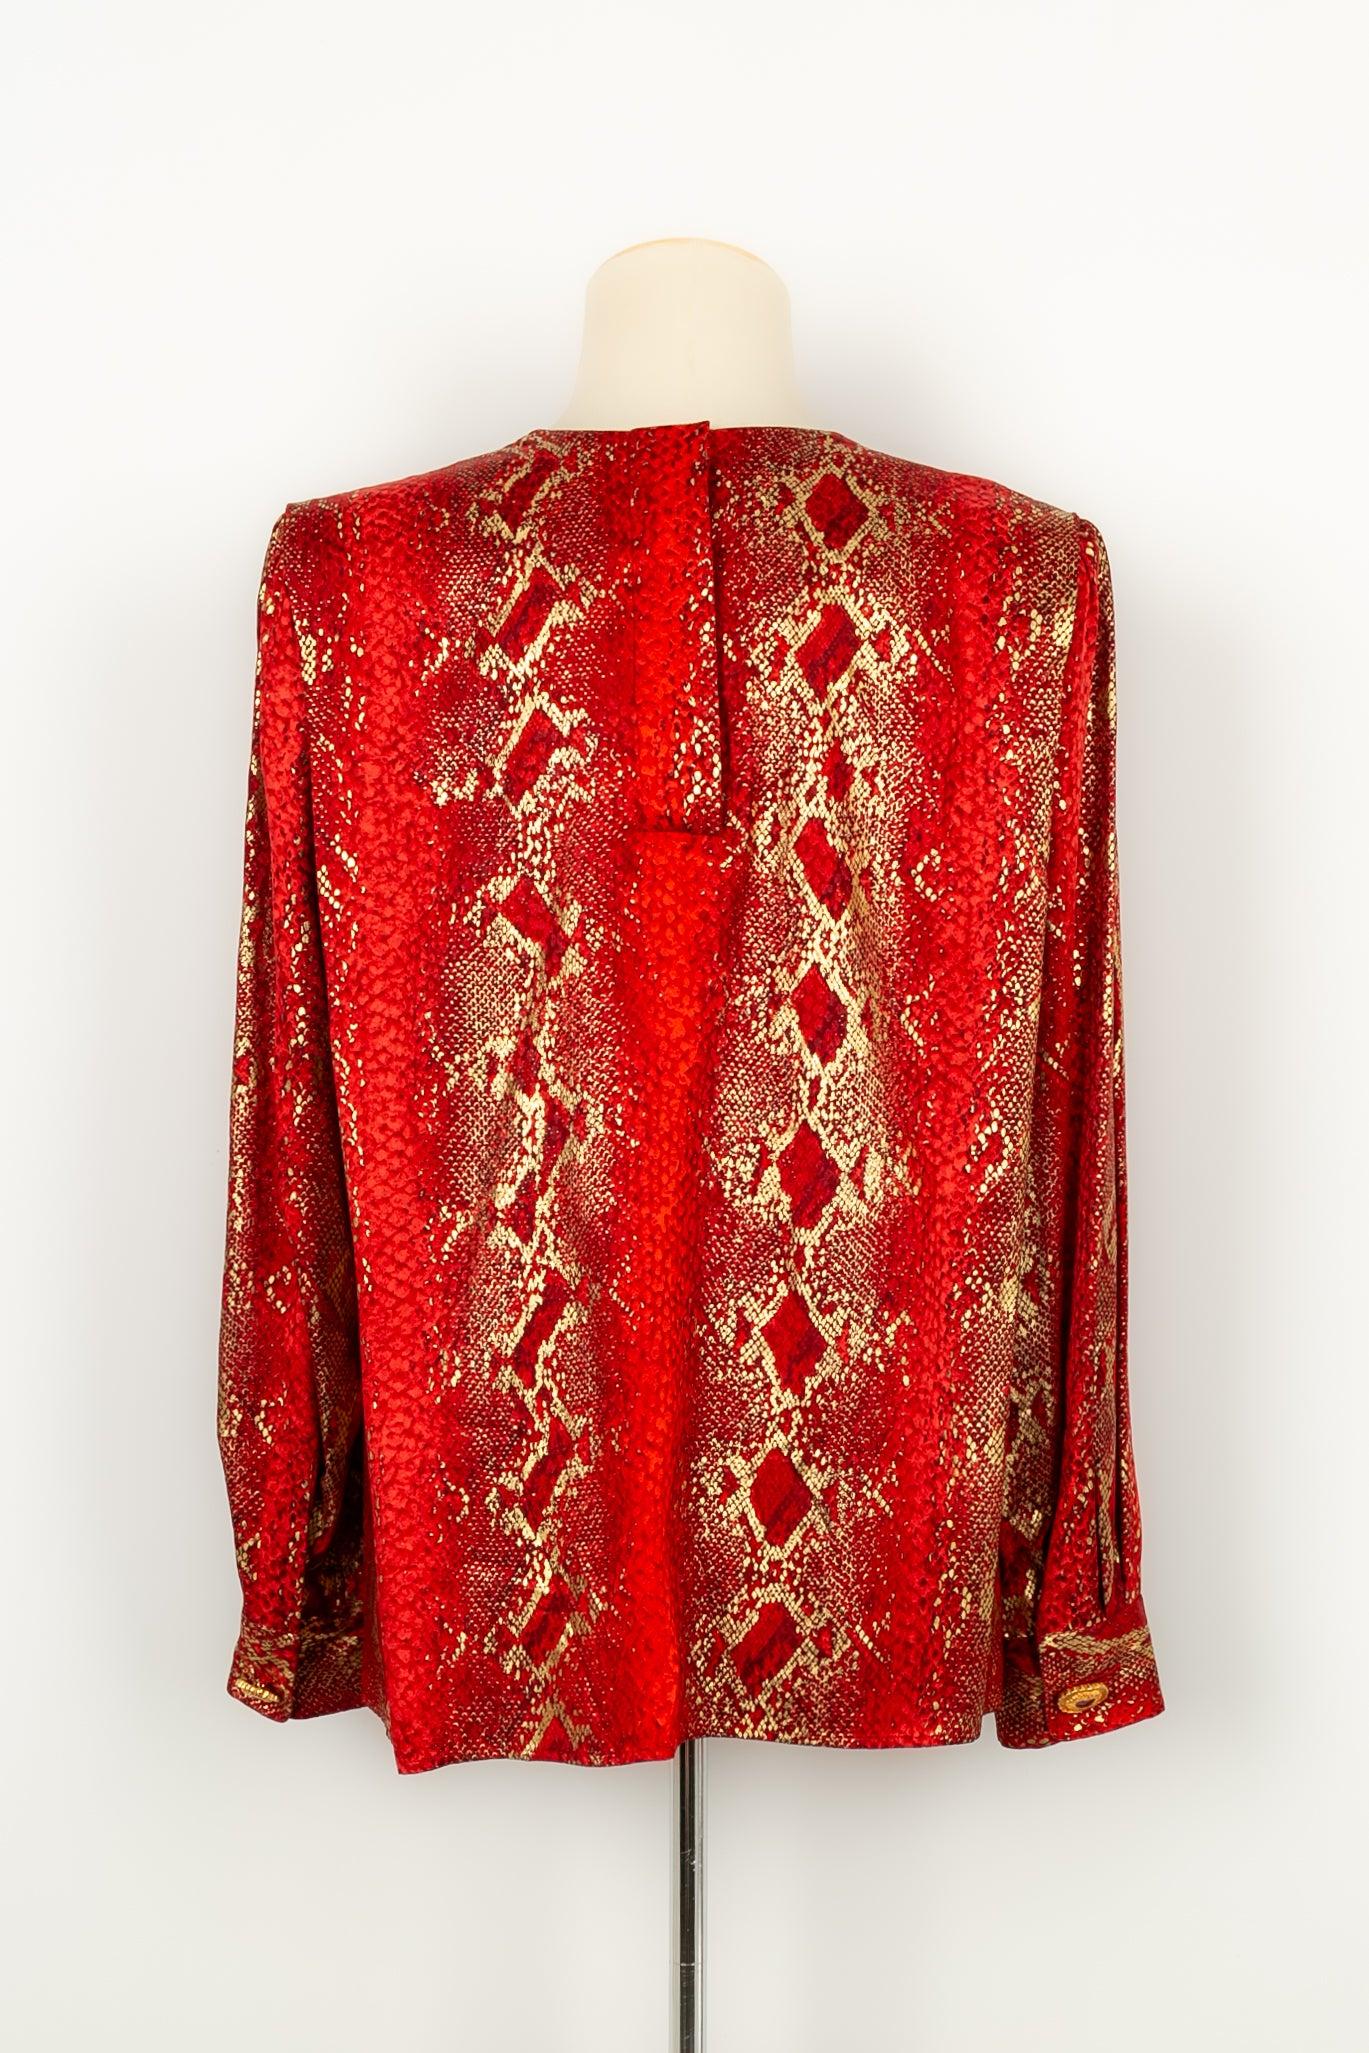 Yves Saint Laurent Long-Sleeved Top Golden Snake-Skin-Style In Excellent Condition For Sale In SAINT-OUEN-SUR-SEINE, FR